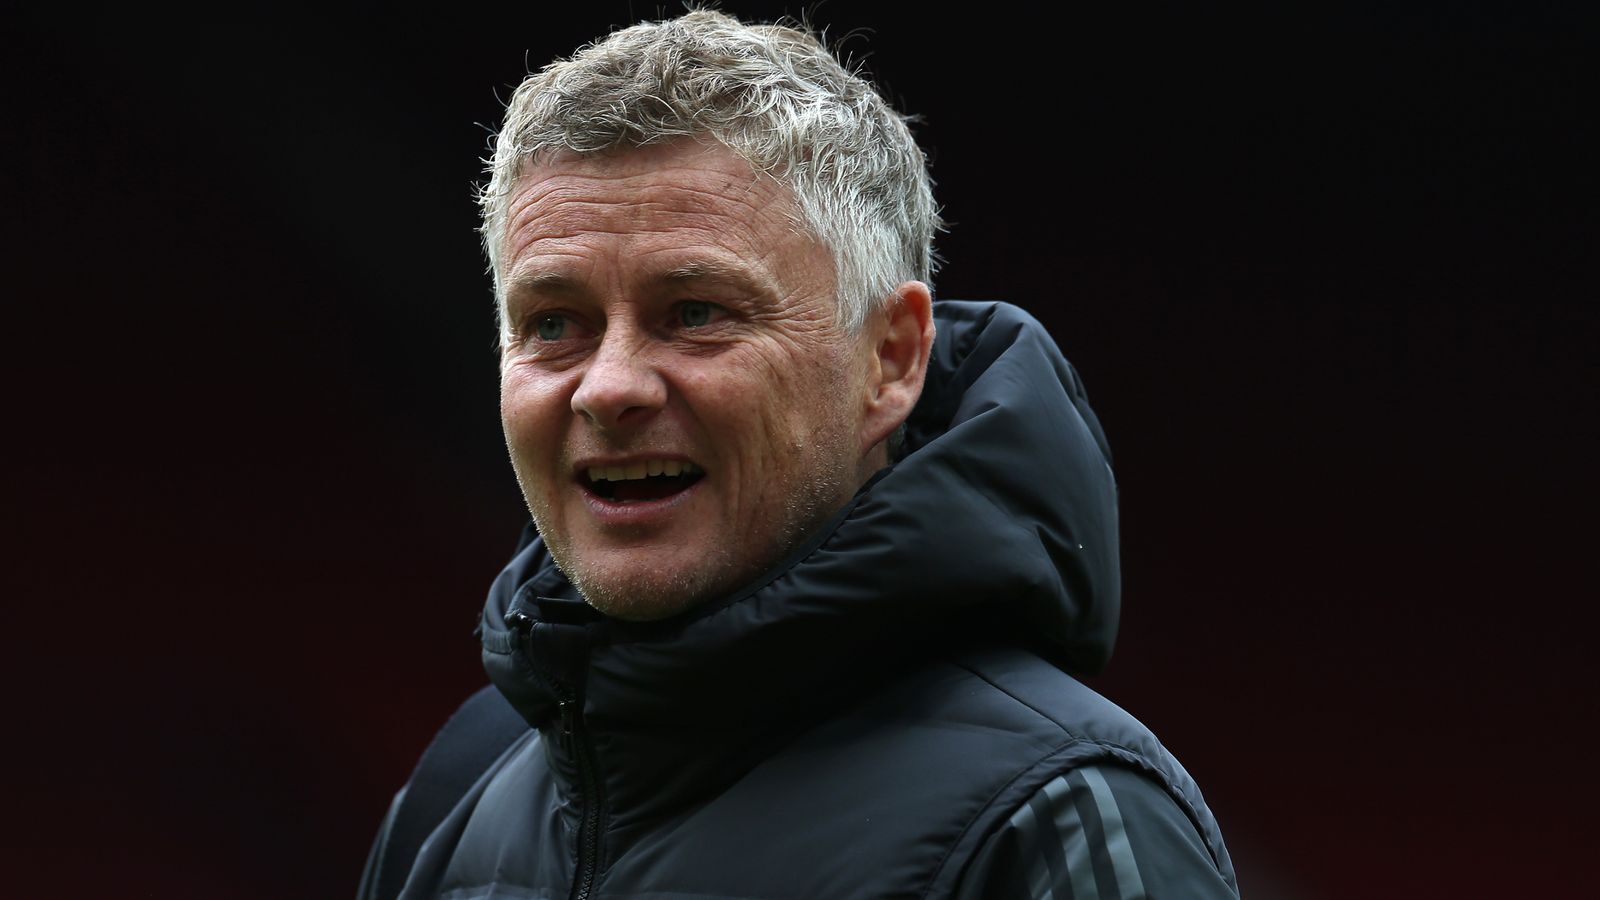 Ole Gunnar Solskjaer wants to anticipate more arrivals in the transfer market